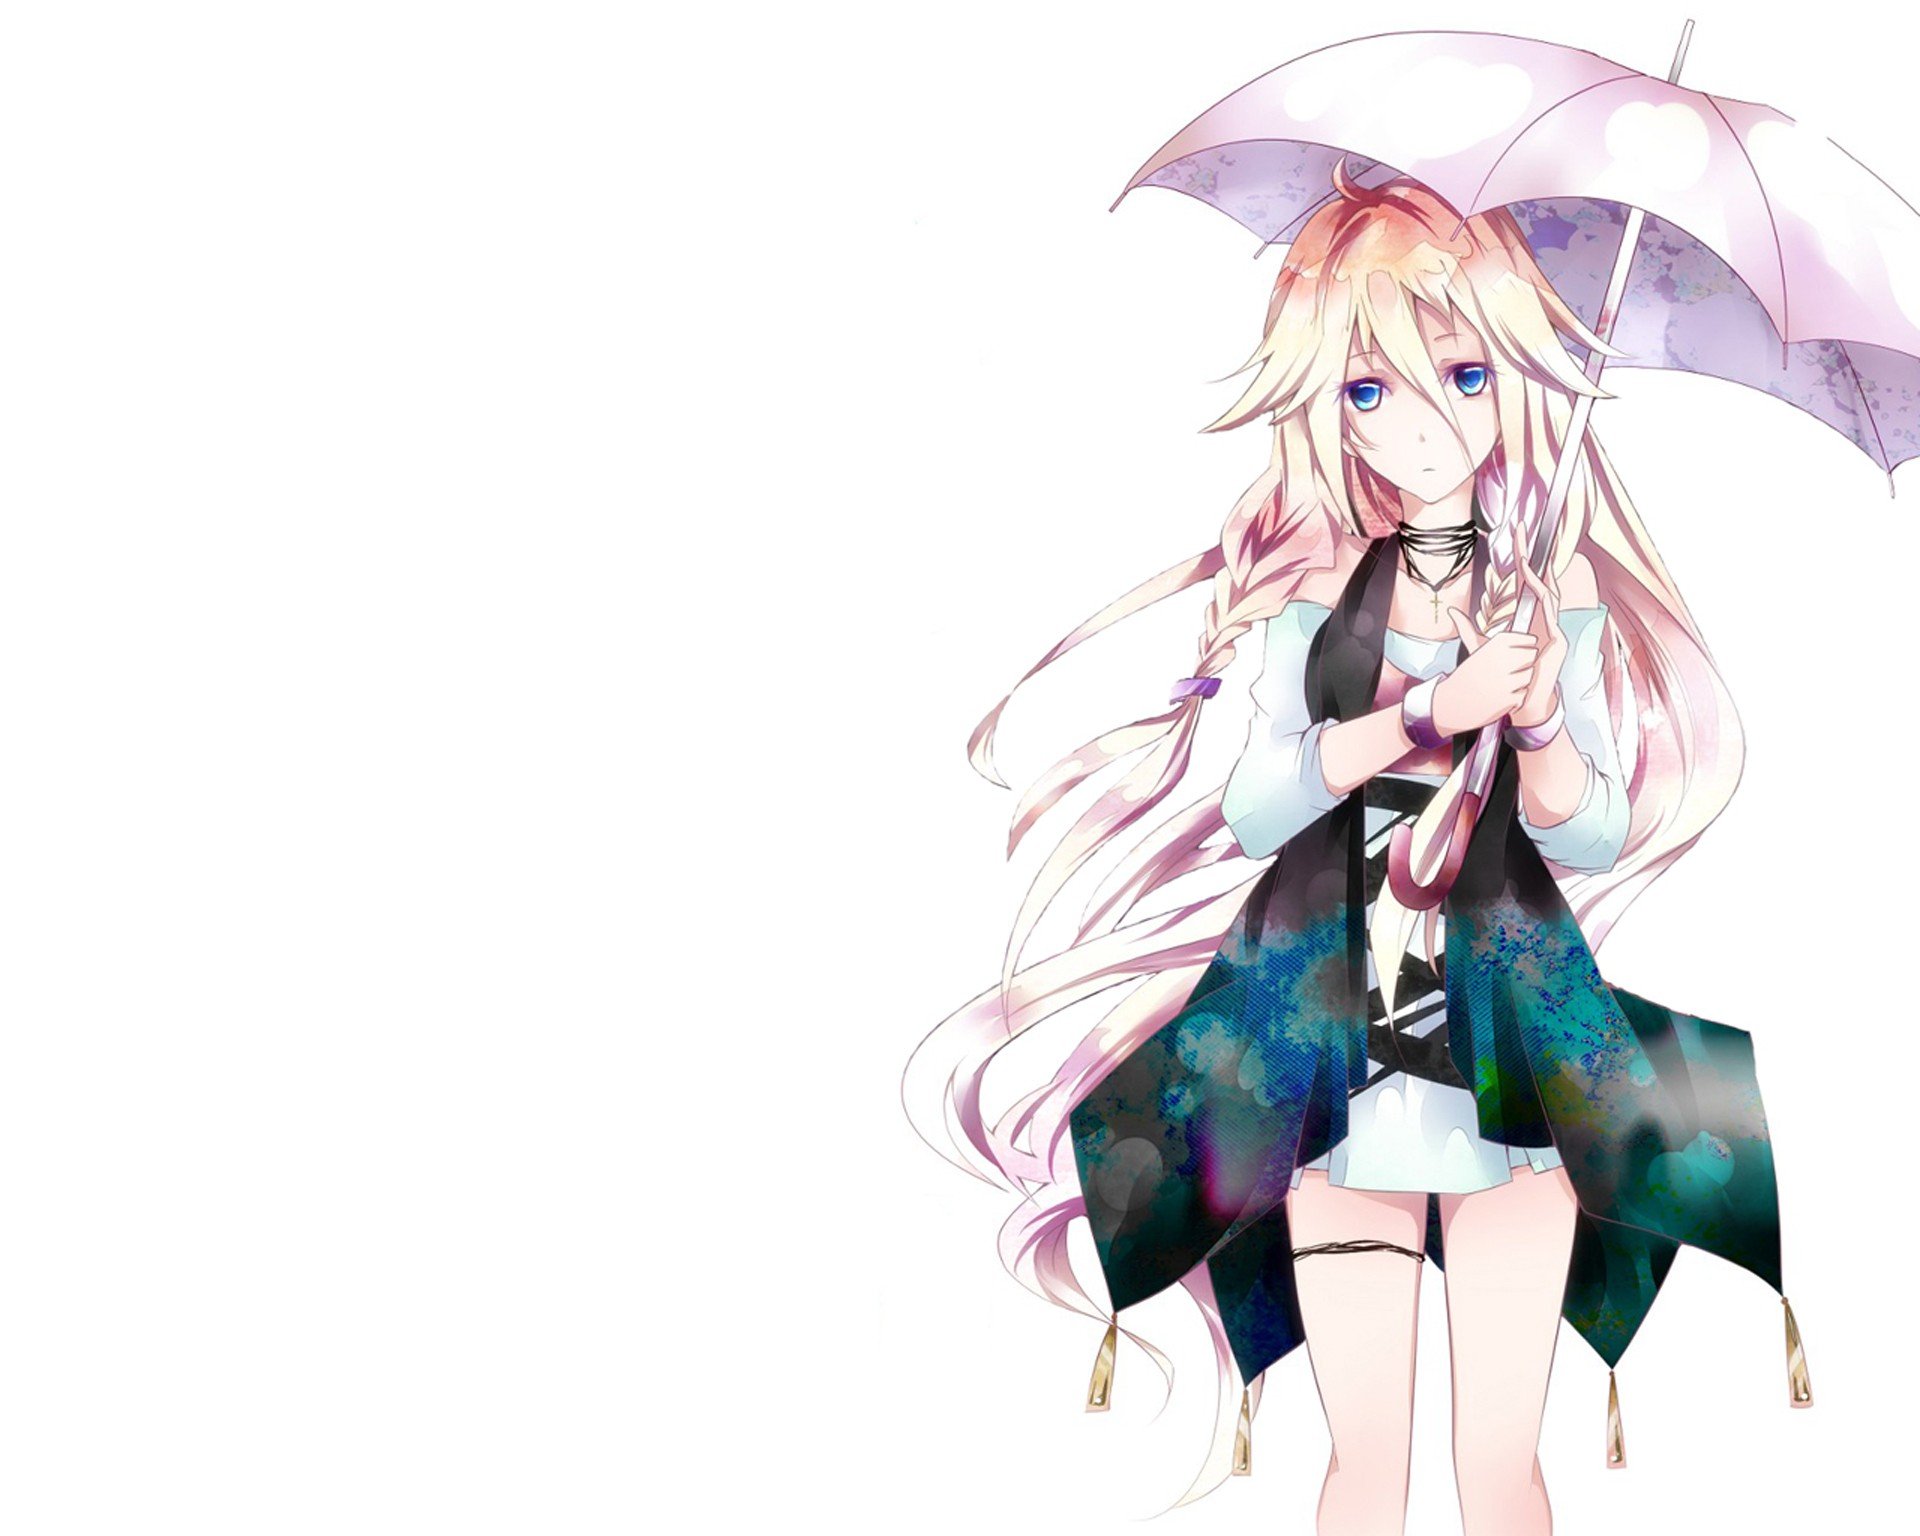 vocaloid, Simple, Background, Anime, Girls, White, Background Wallpaper